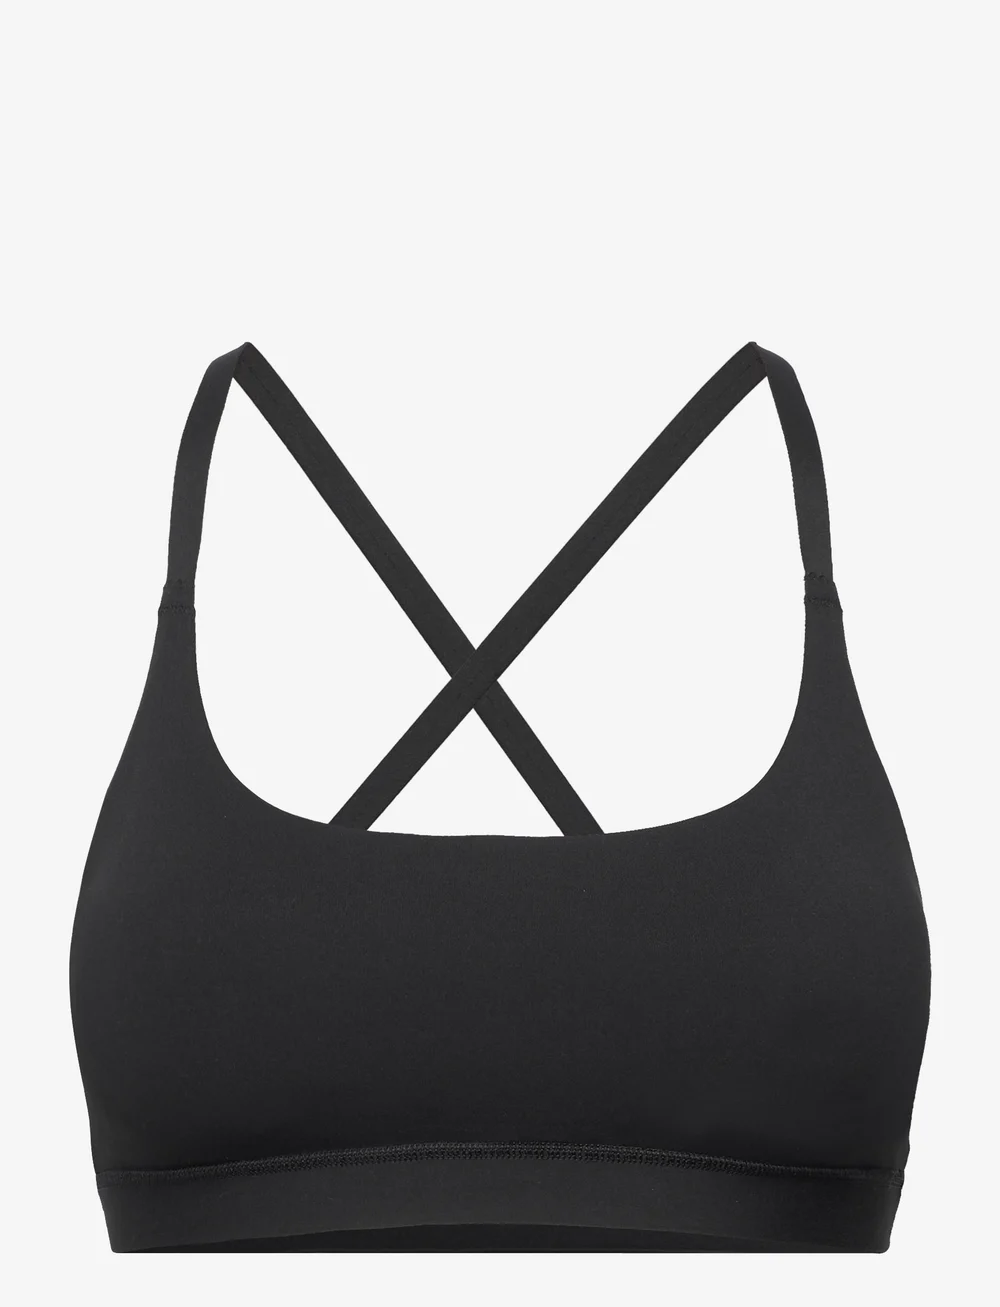 How to Find the Right adidas Sports Bra